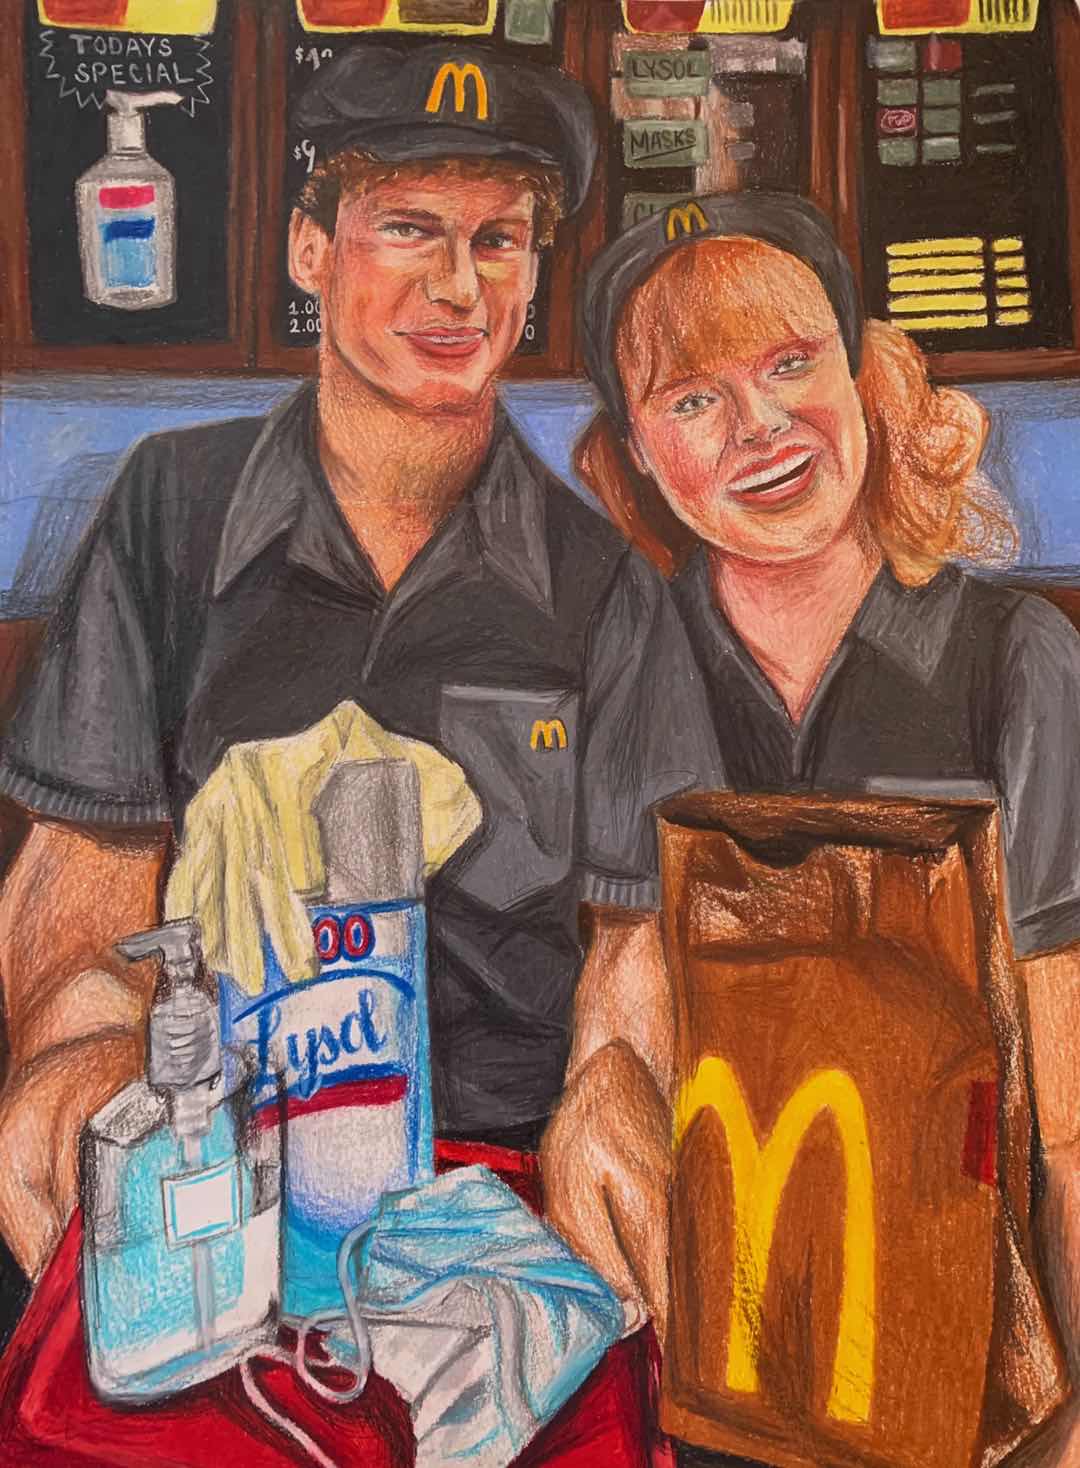 two fast food employee workers holding a tray with a bag and cleaning supplies on it